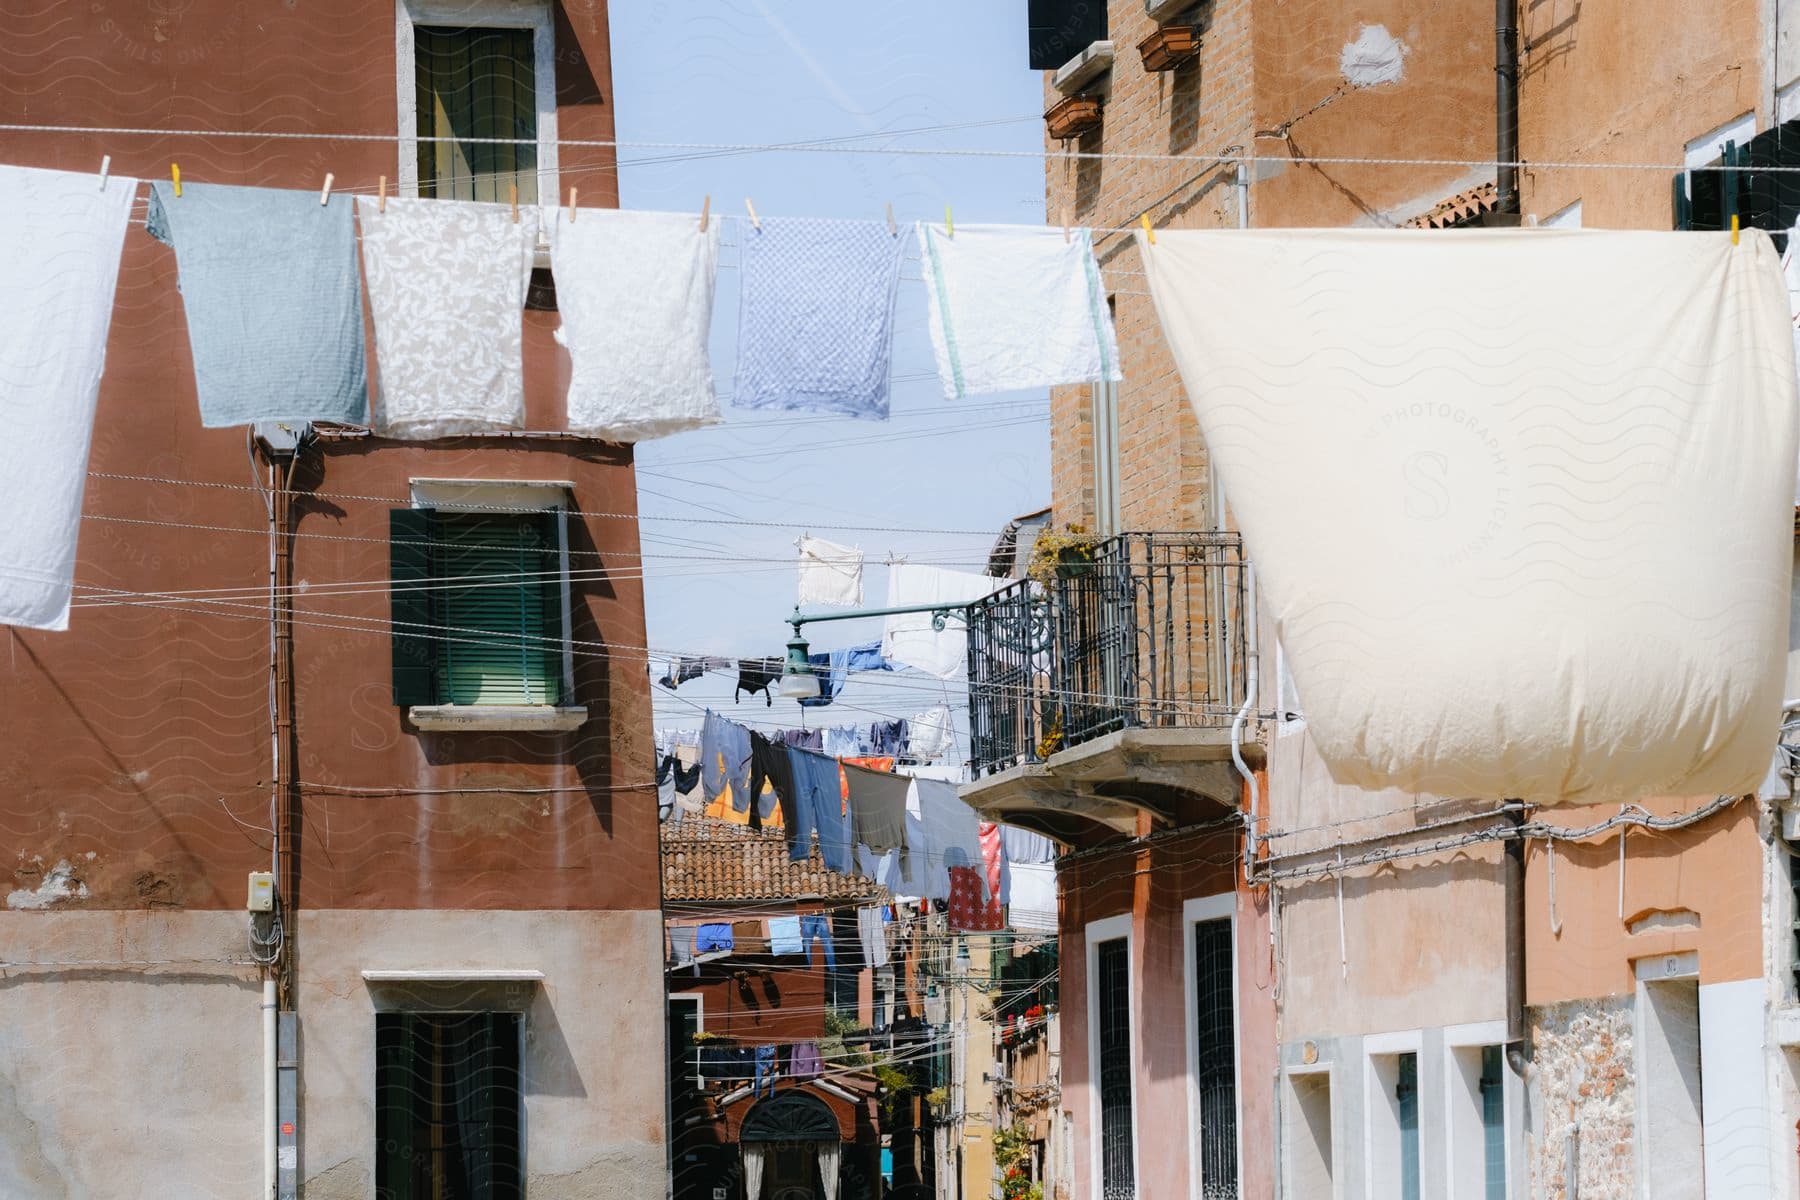 Clothes hanging on clotheslines between different buildings